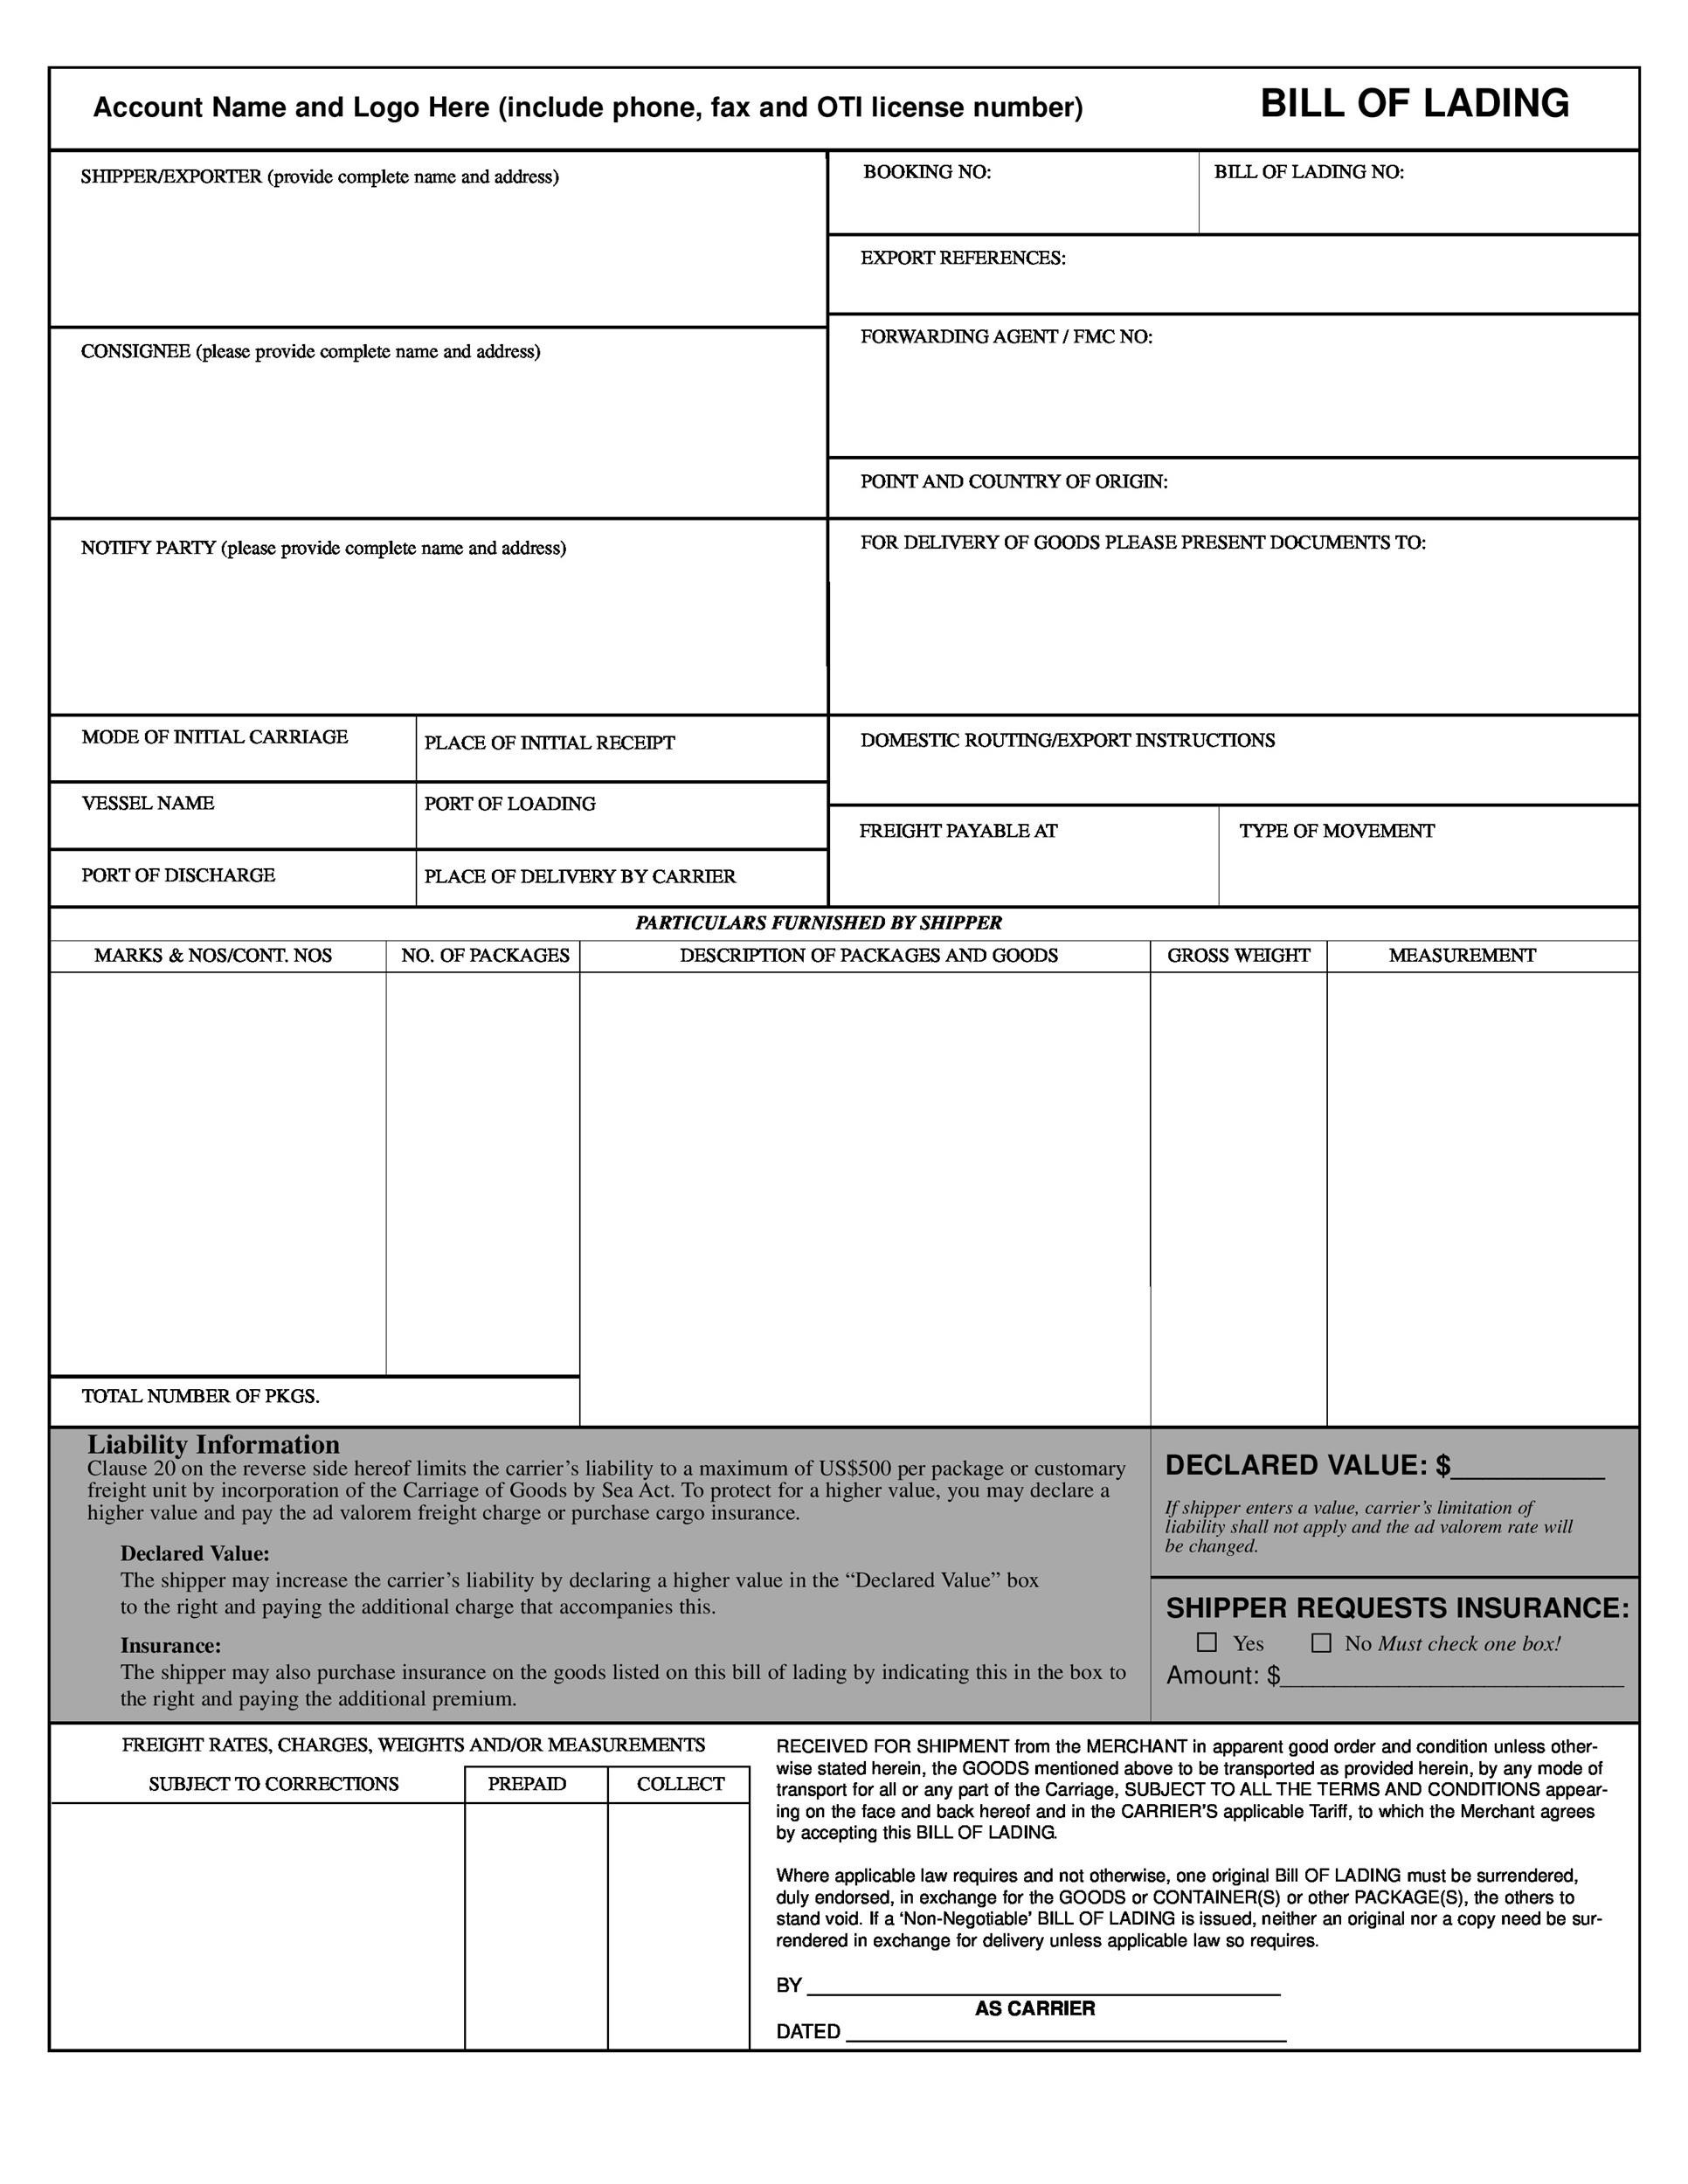 printable-sample-blank-bill-of-lading-form-bill-of-lading-real-images